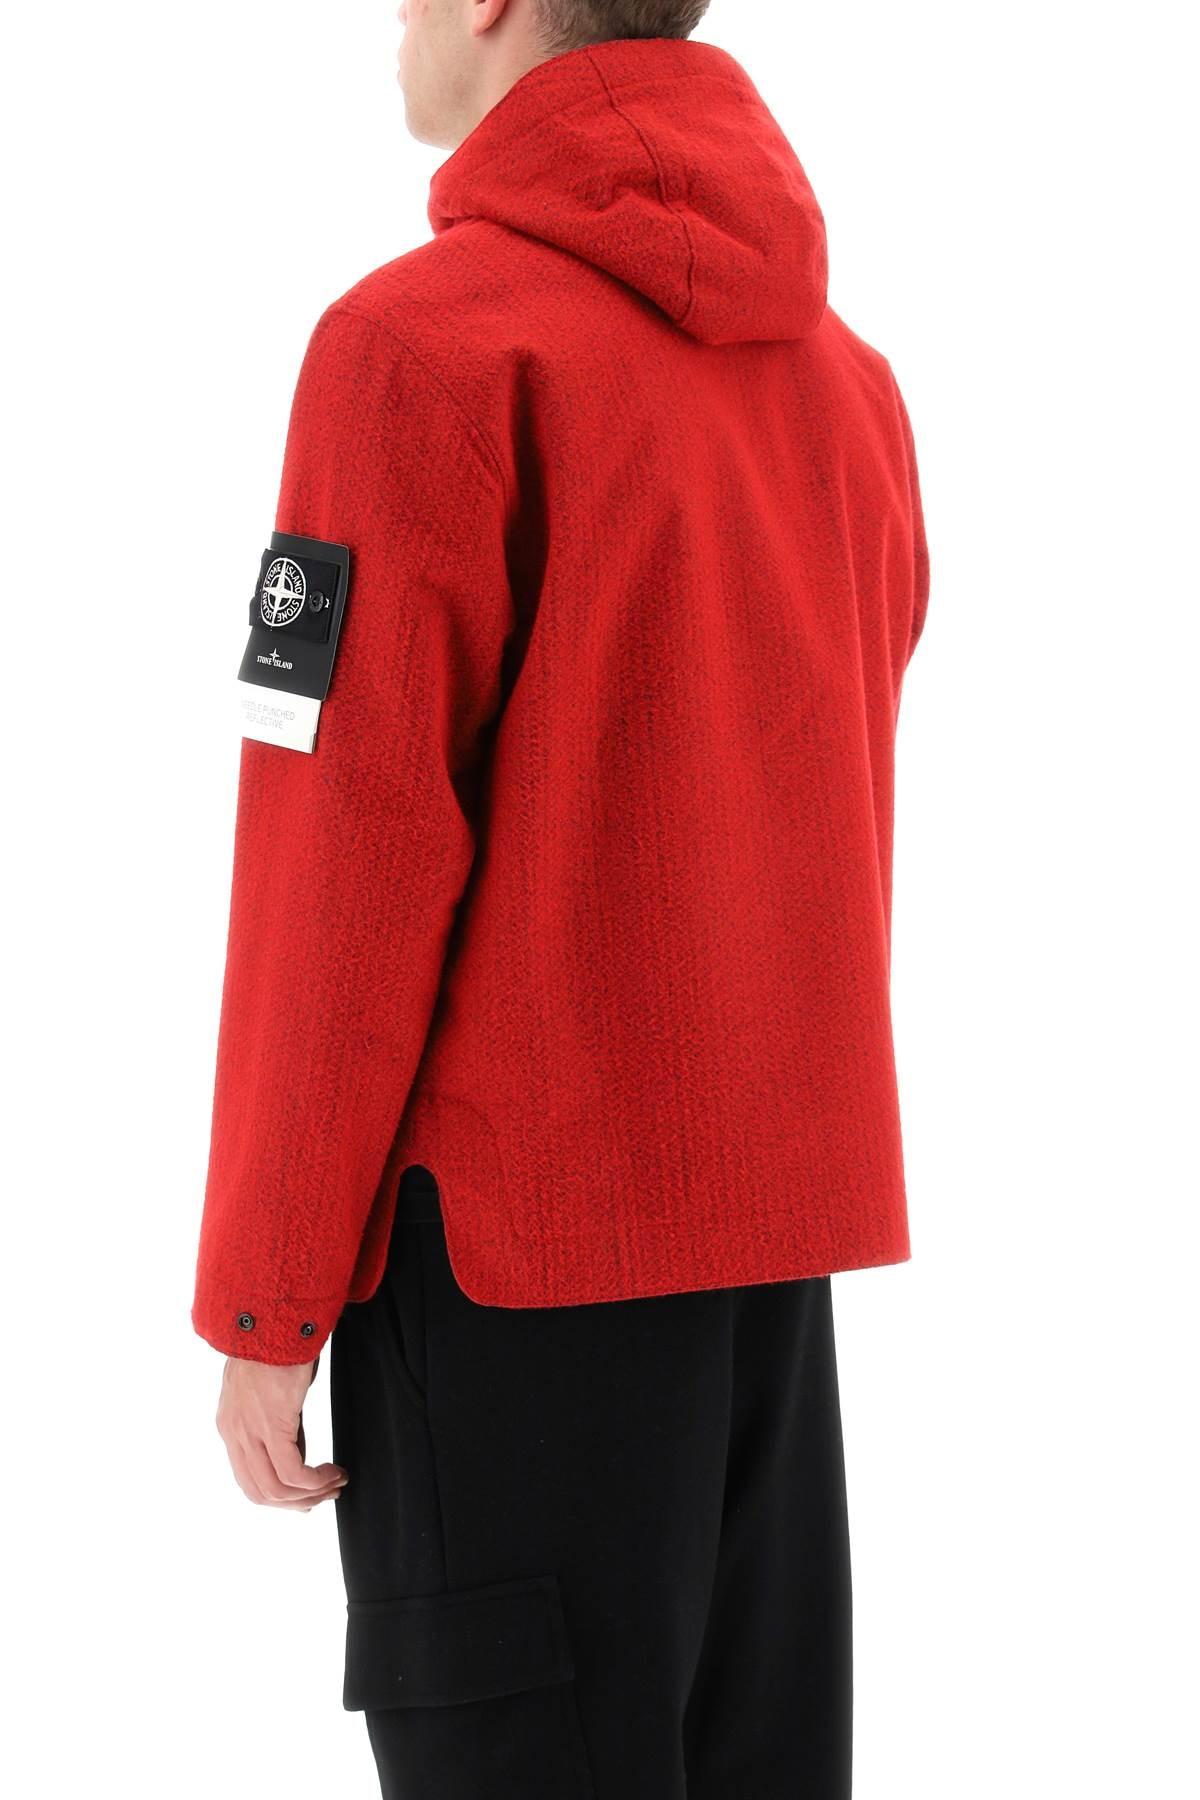 Stone Island Needle Punched Reflective Hooded Jacket in Red for Men | Lyst